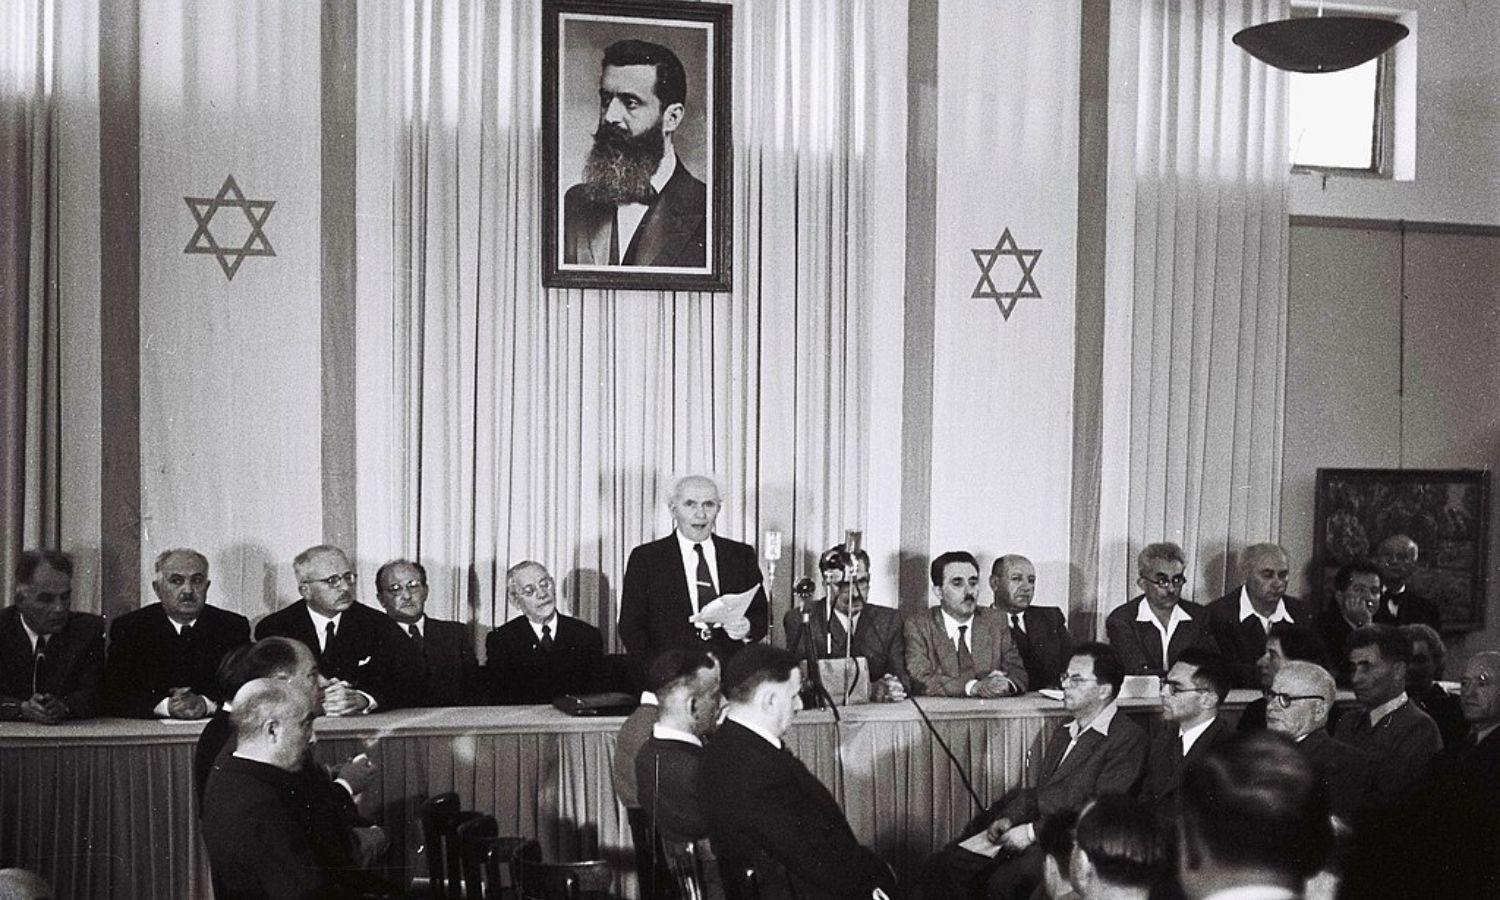 OTD in 1948: Israel declared independence from the British administration.